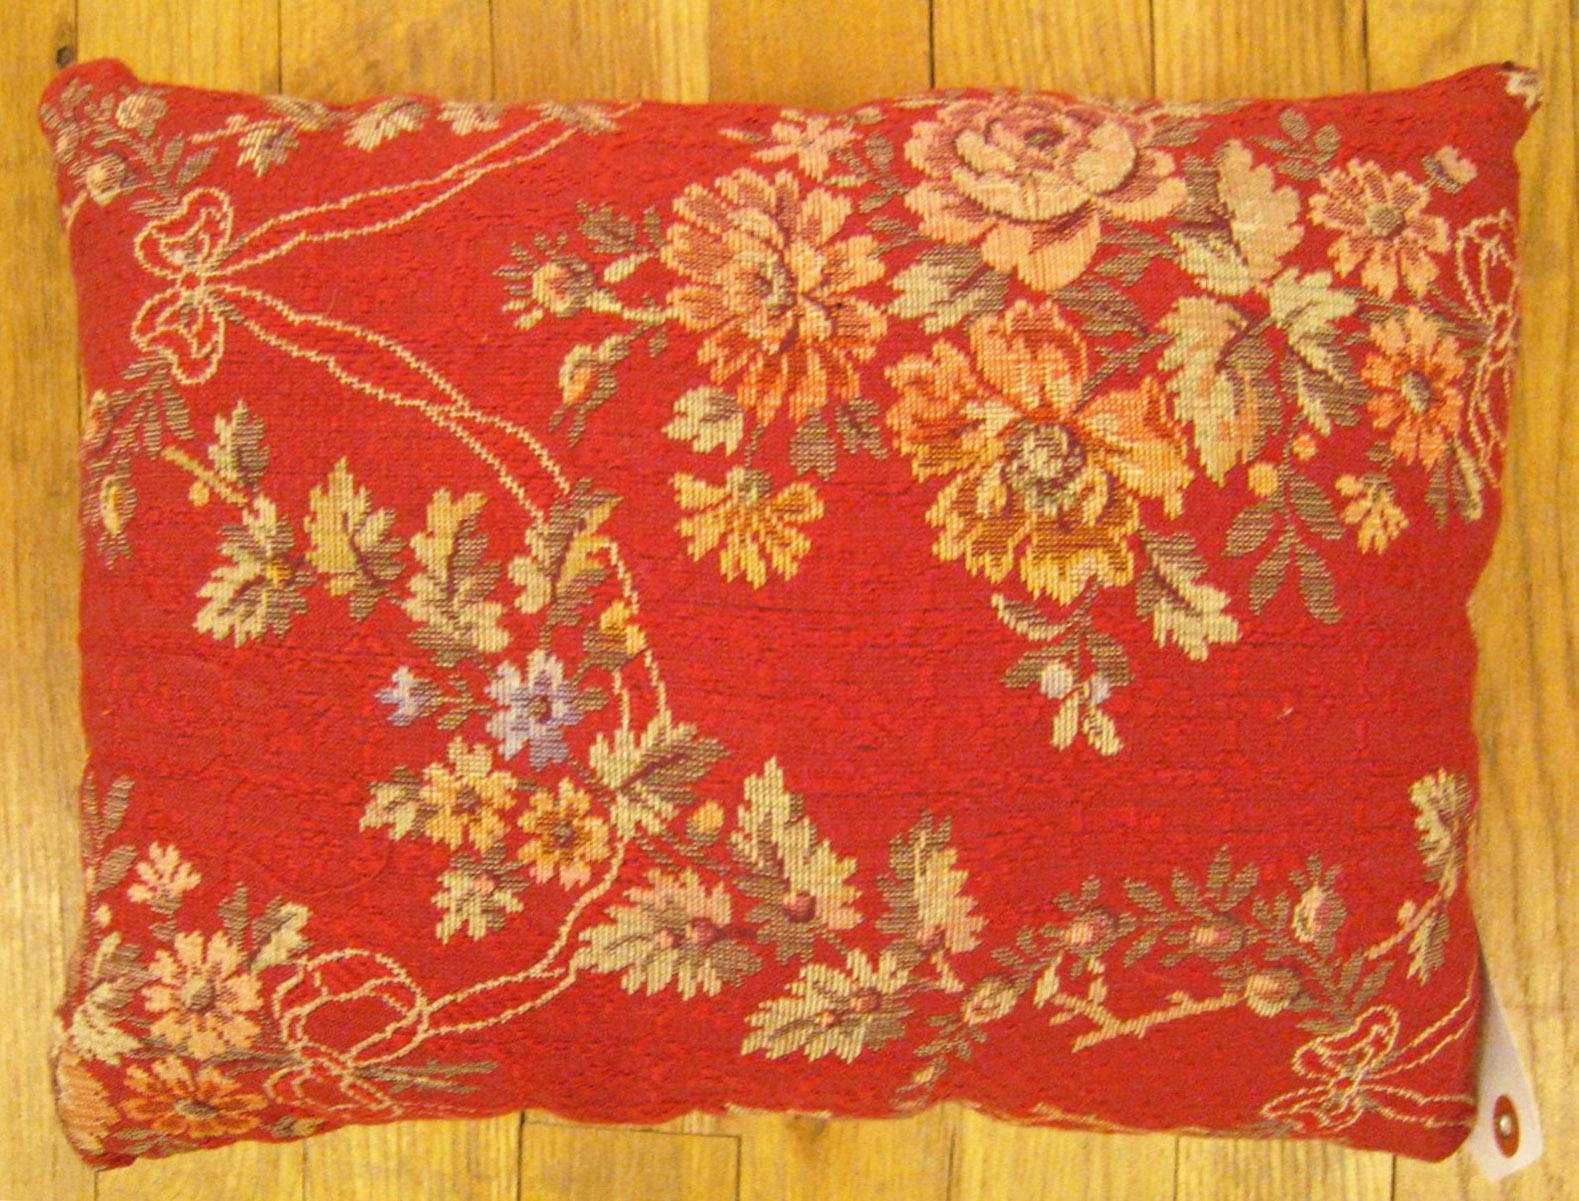 Antique Jacquard Tapestry Pillow; size 1'0” x 1'3”.

An antique decorative pillow with floral elements allover a red central field, size 1'0